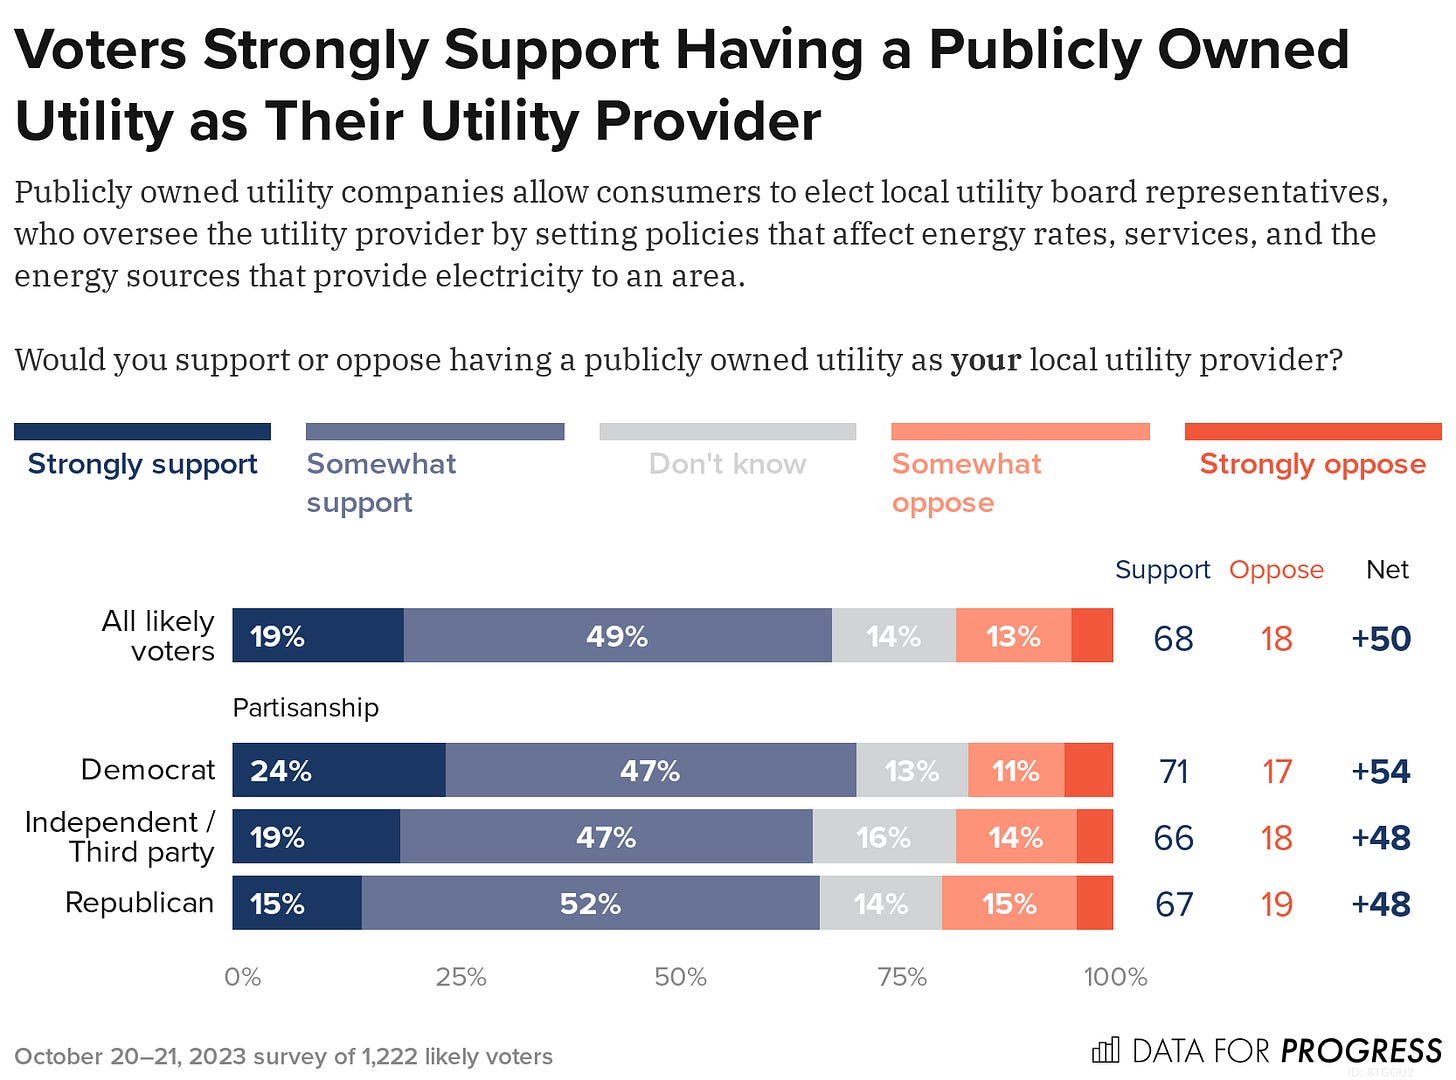 Bar chart of polling data from Data For Progress. Title: Voters Strongly Support Having a Publicly Owned Utility as Their Utility Provider. Description: Publicly owned utility companies allow consumers to elect local utility board representatives, who oversee the utility provider by setting policies that affect energy rates, services, and the energy sources that provide electricity to an area. Would you support or oppose having a publicly owned utility as your local utility provider? All likely voters — Support: 68%, Oppose: 18% Democrat — Support: 71%, Oppose: 16% Independent / Third party — Support: 66%, Oppose: 18% Republican — Support: 67%, Oppose: 19%  October 20–21, 2023 survey of 1,222 likely voters.